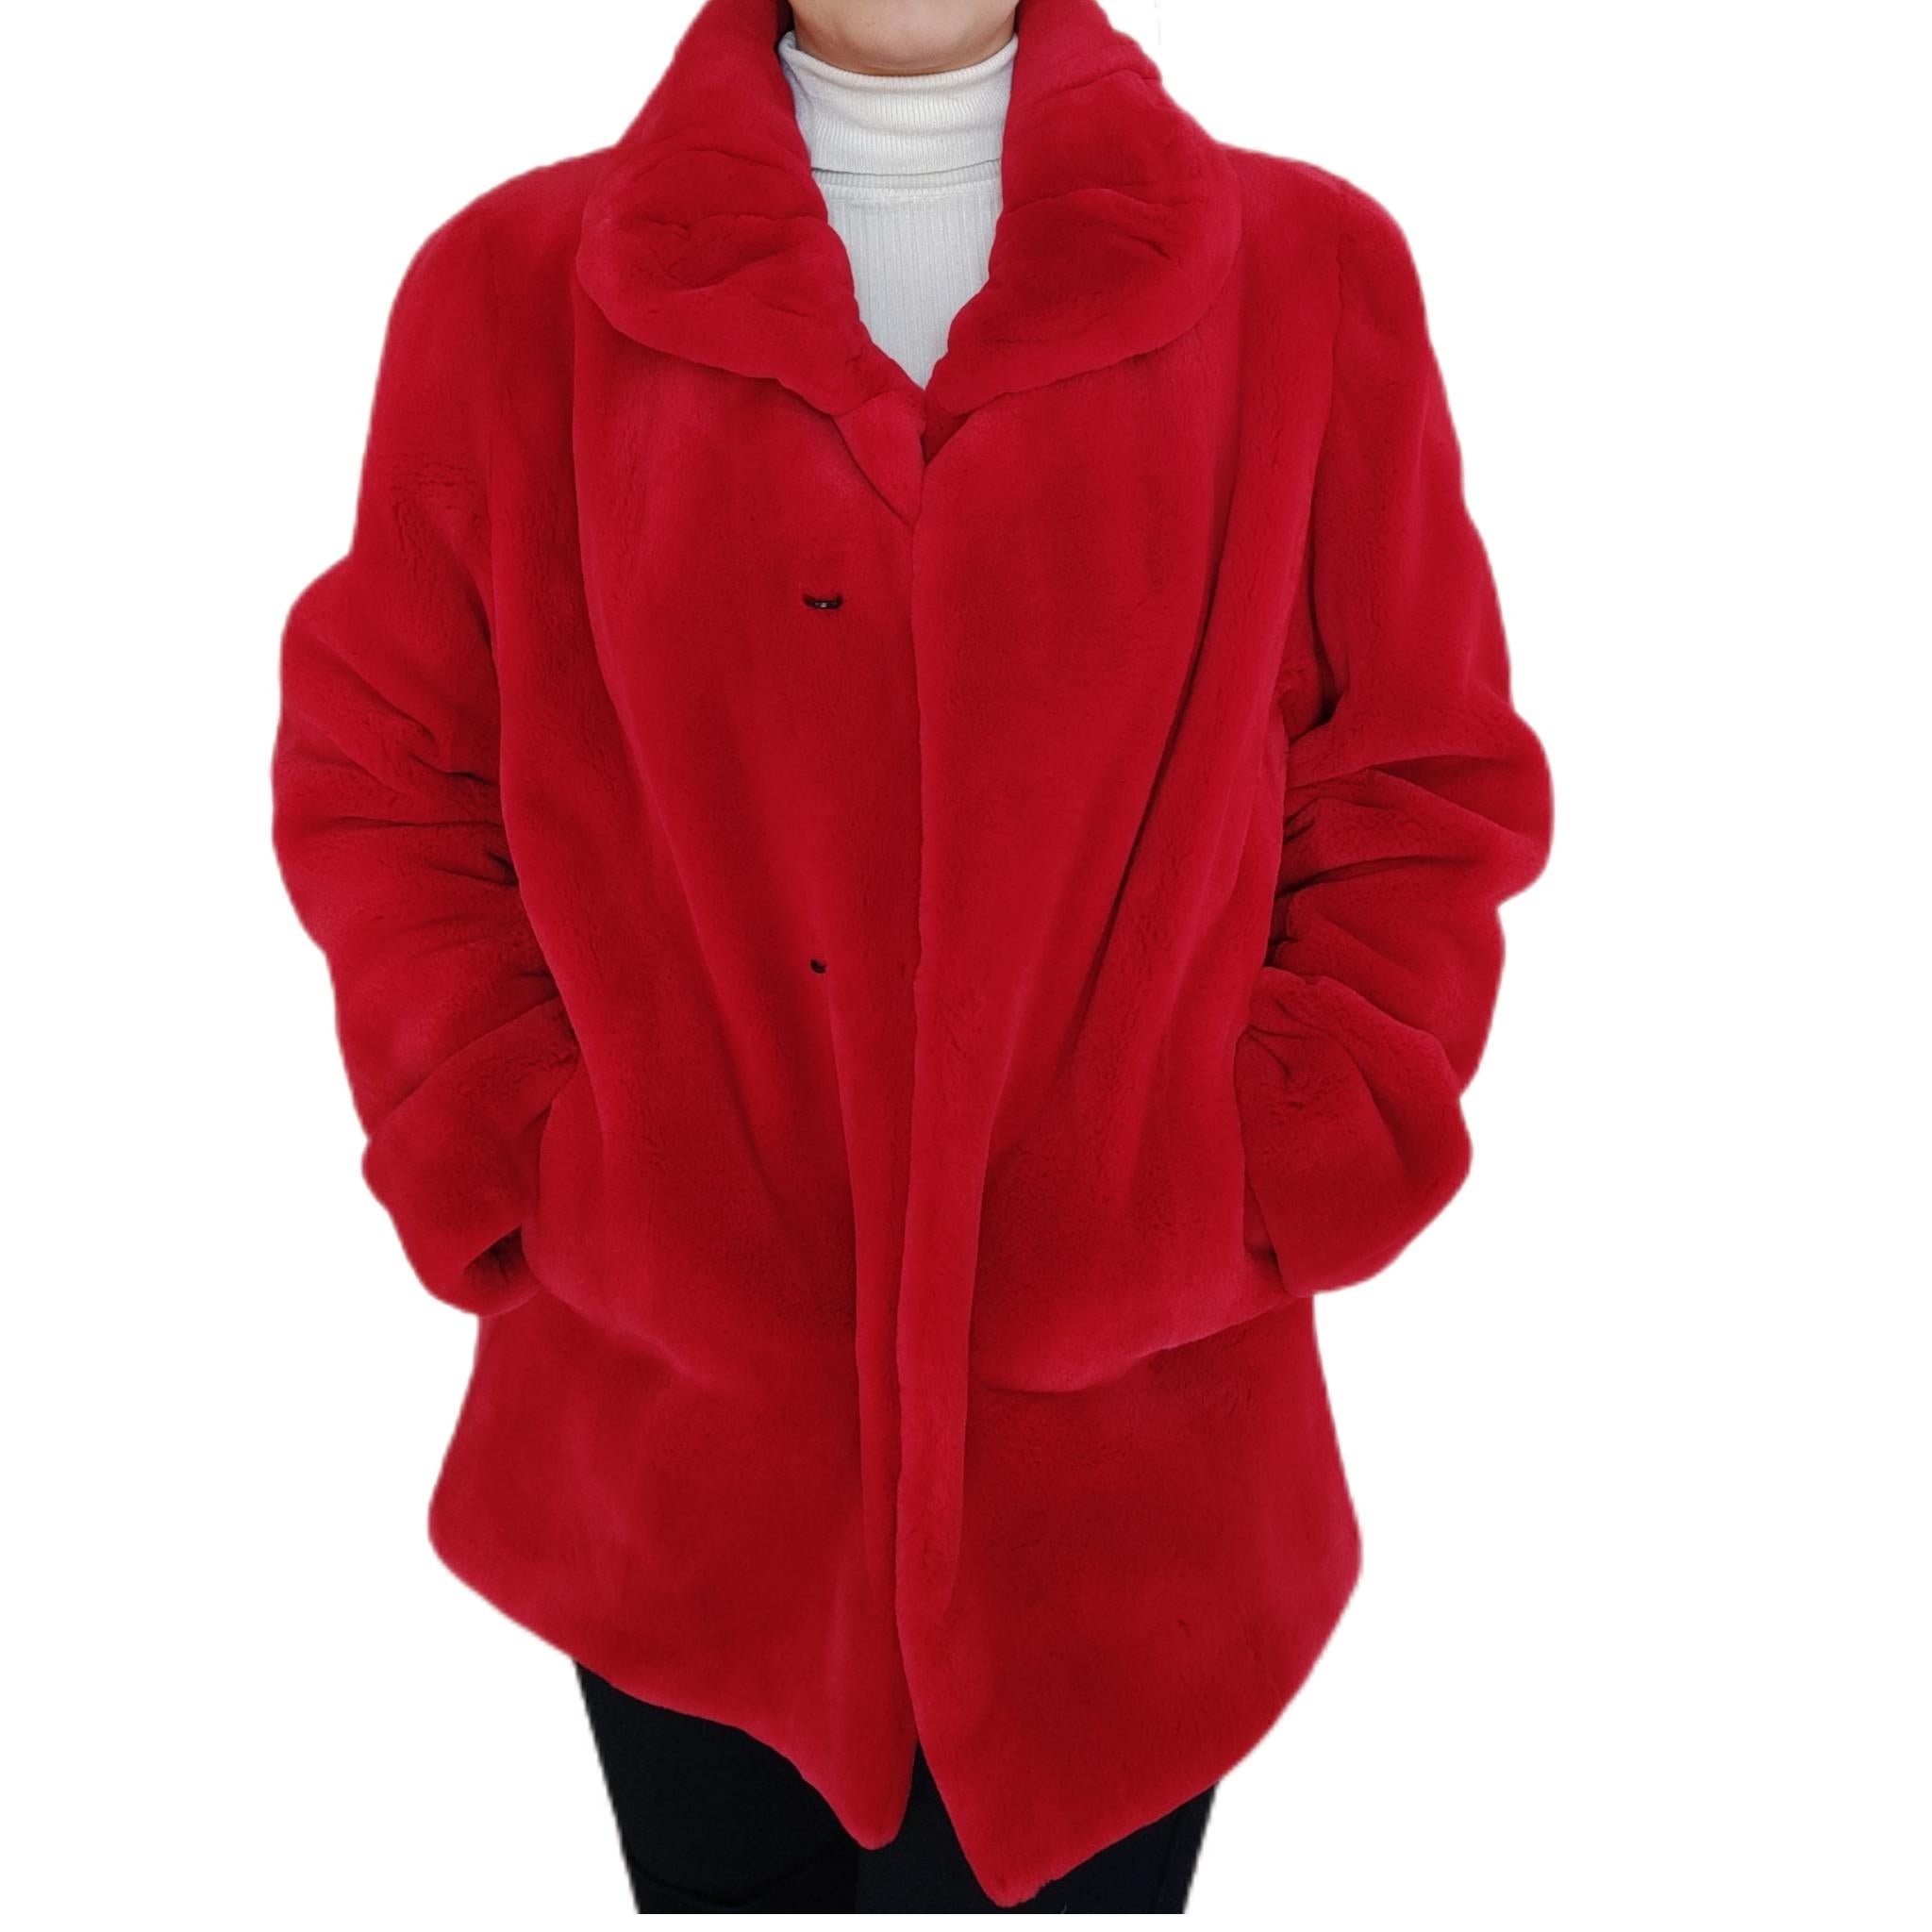 PRODUCT DESCRIPTION:

Brand New Birger Christensen Sheared Mink Fur Coat (Size-12/M)

Condition: New

Closure: Hooks & Eyes

Colour: Red

Material: Female Sheared Mink

Garment type: Car Coat

Sleeves: Slight Straight

Pockets: Two side